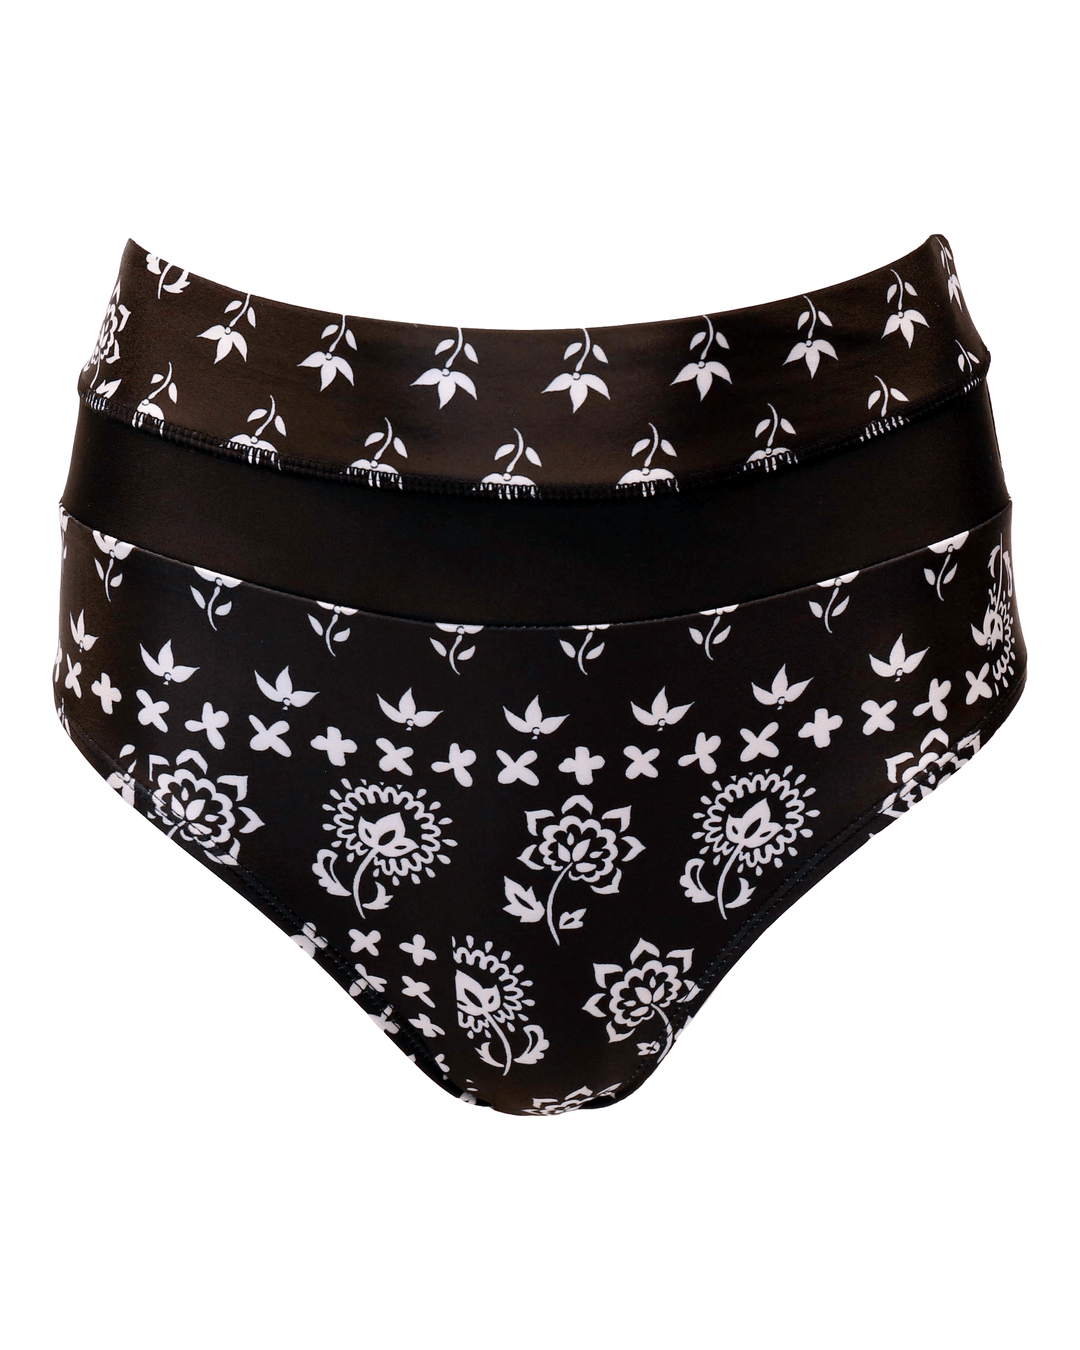 Flat lay of black and white floral high waisted swimsuit bottoms.